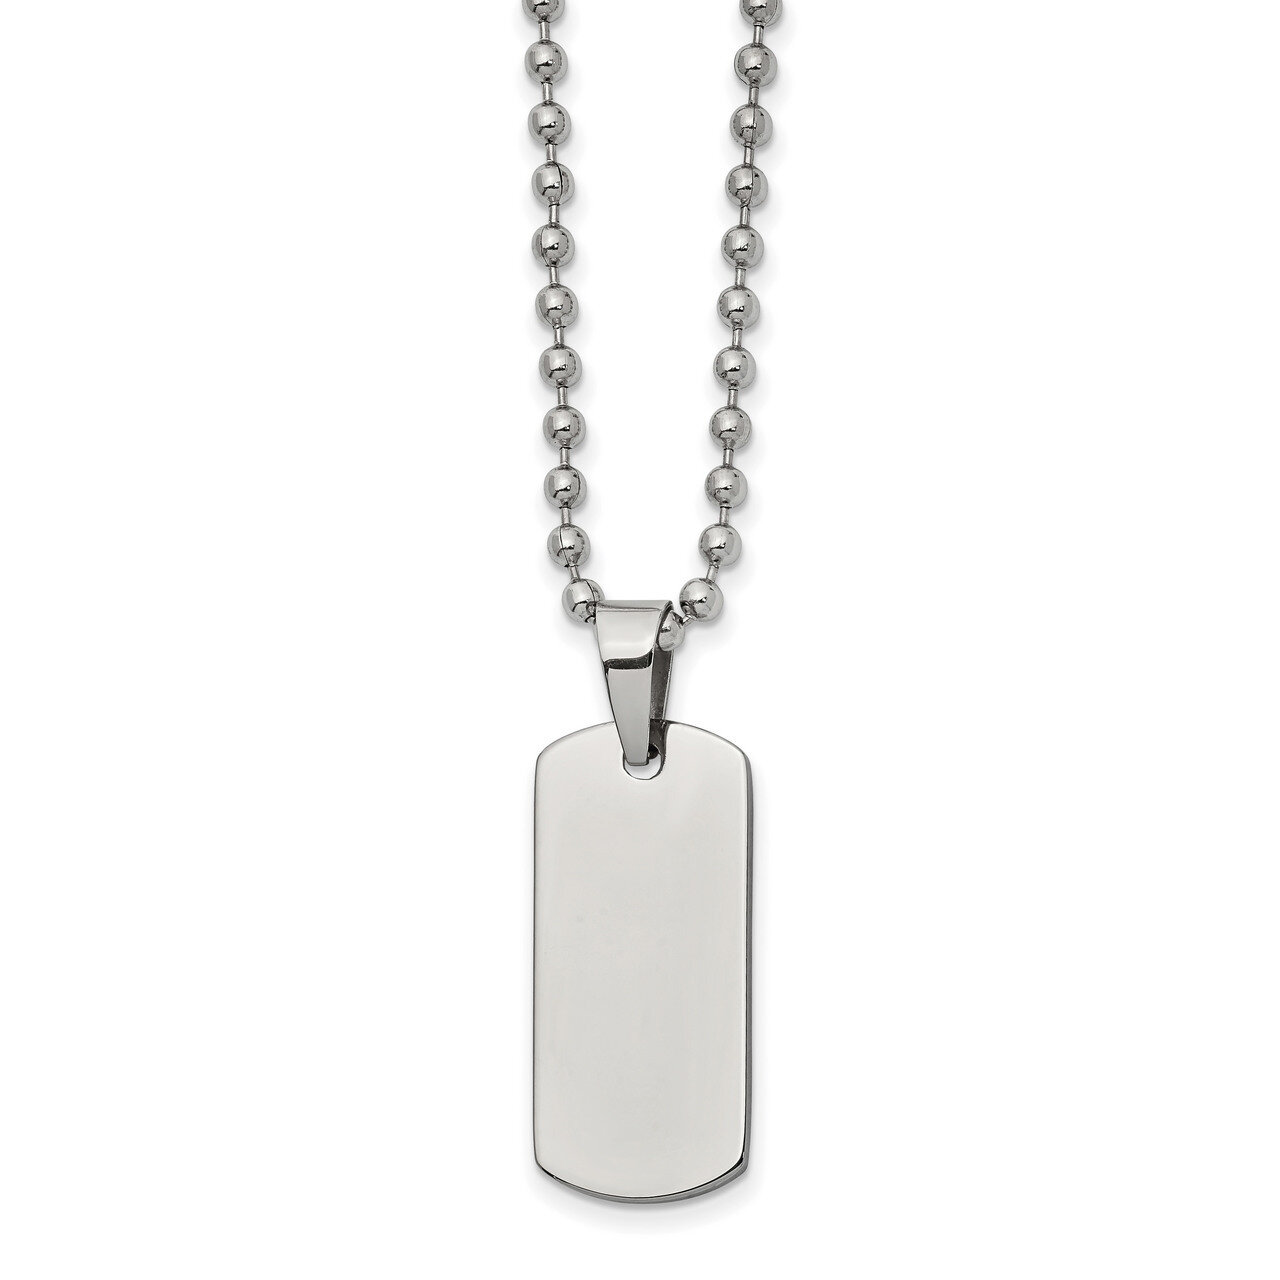 Reversible Dog Tag 22 Inch Necklace Stainless Steel Brushed and Polished SRN2595-22